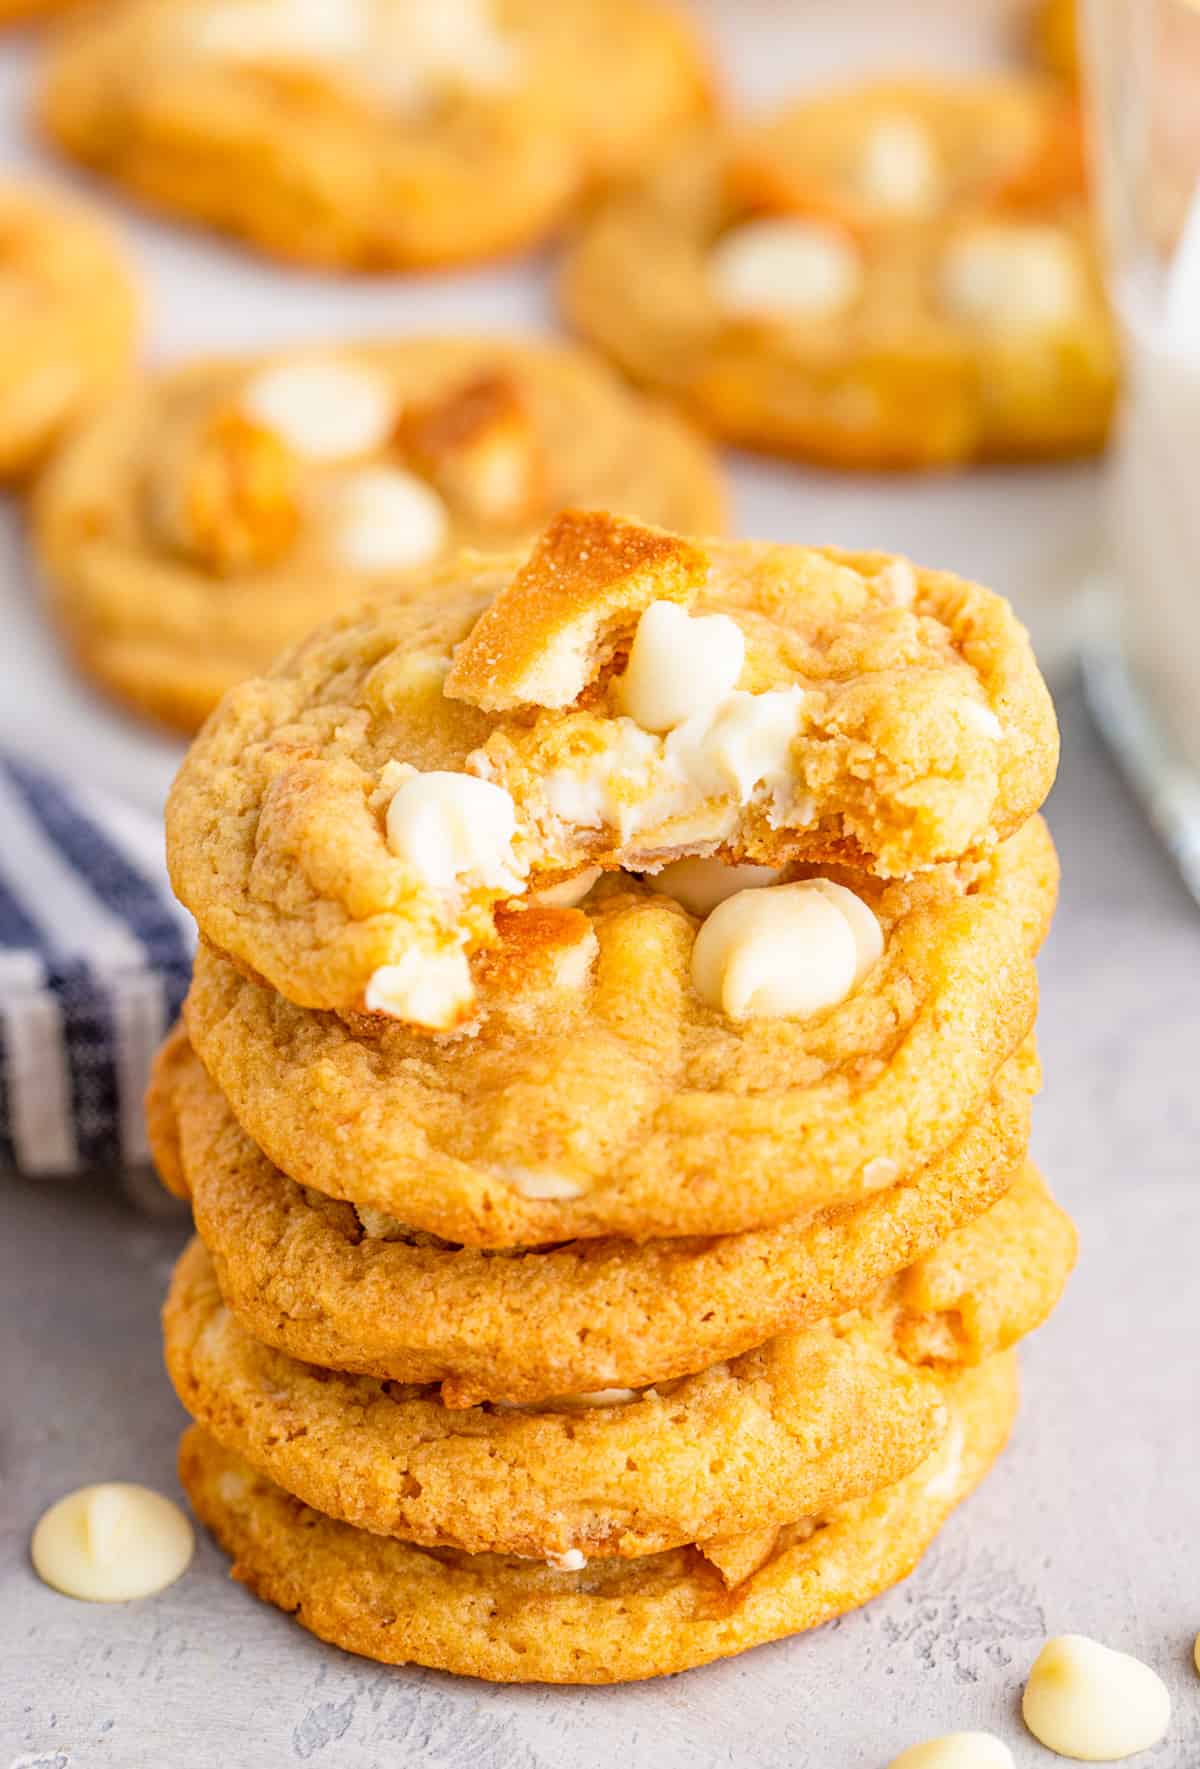 Stacked Banana Pudding cookies with a bite taken out of the top cookie showing the white chocolate chips.